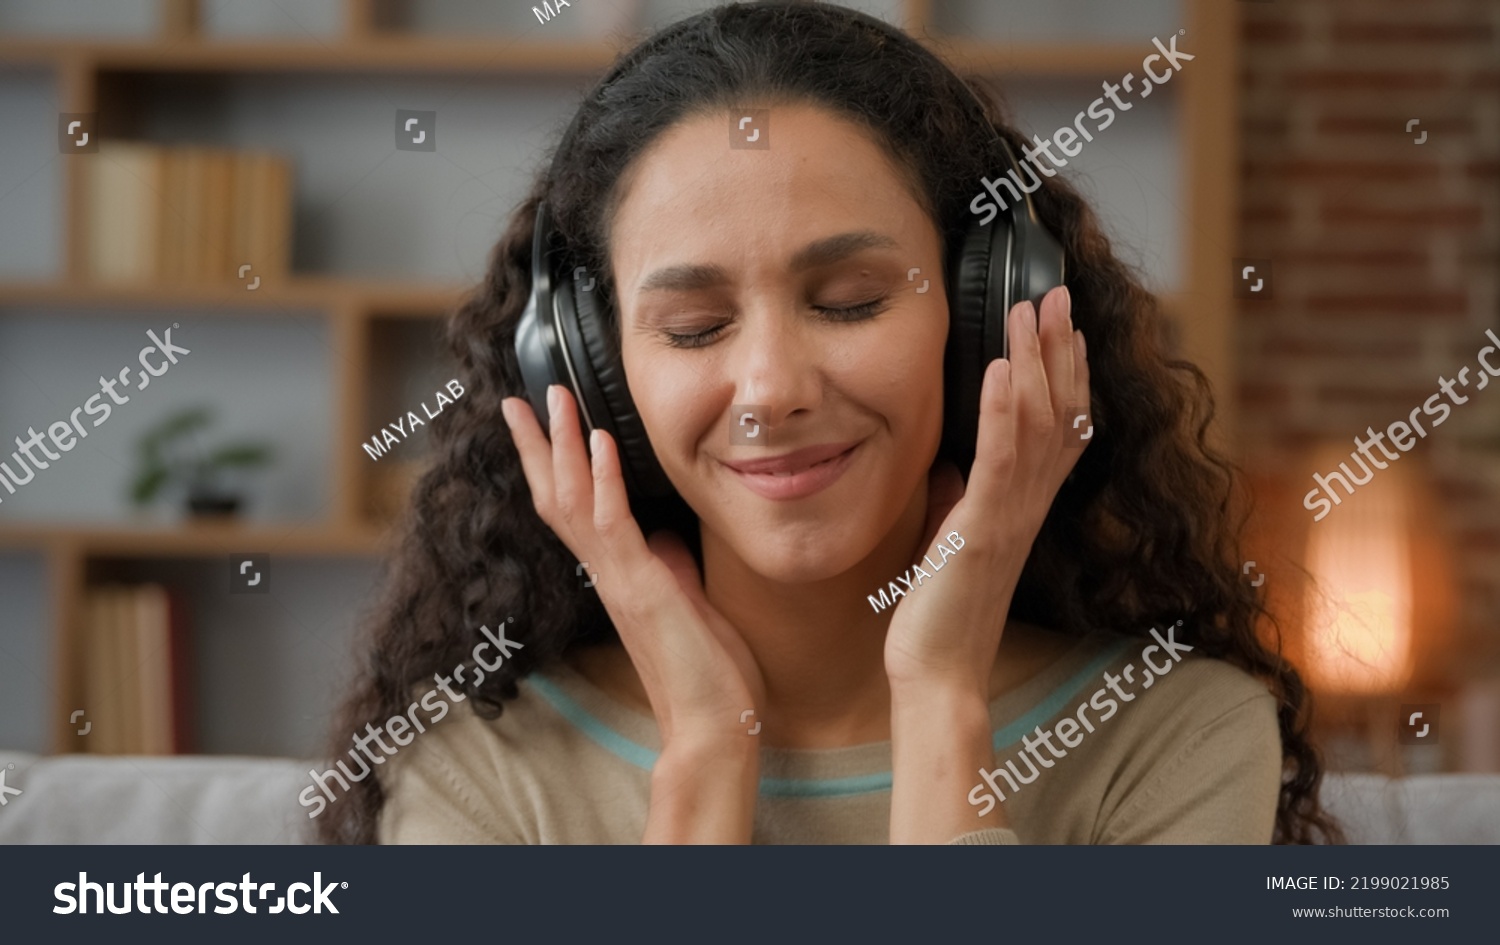 Front view close up smiling Hispanic woman with smiling enjoining lady relaxing at home with closed eyes listening to music in headphones audio sound song feeling well good mood hobby holiday indoors #2199021985